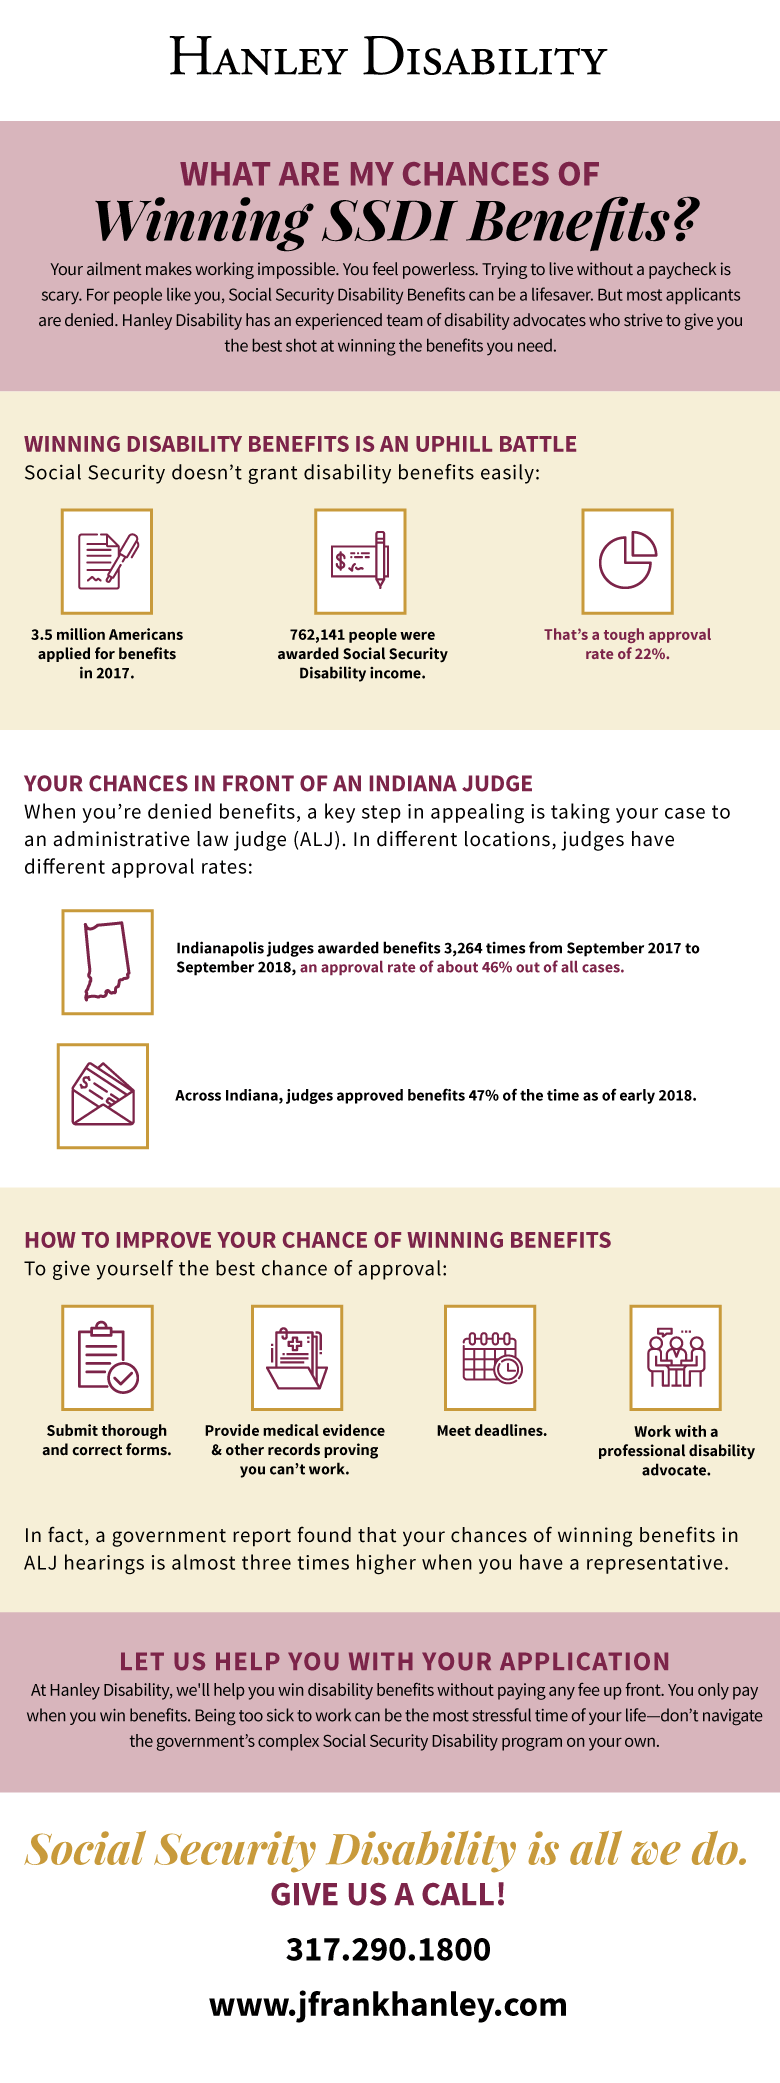 An infographic answering the question: "What are my chances of winning SSDI benefits?"